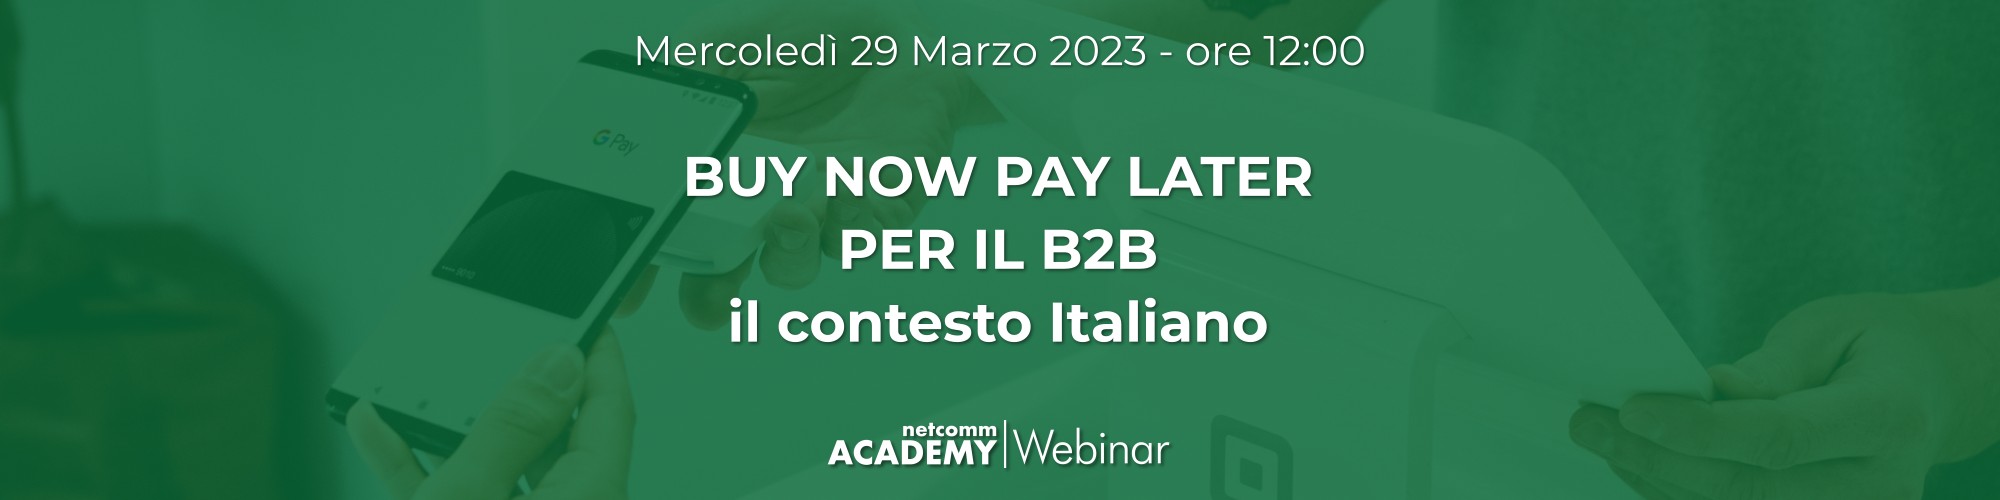 buy now pay later per il B2B